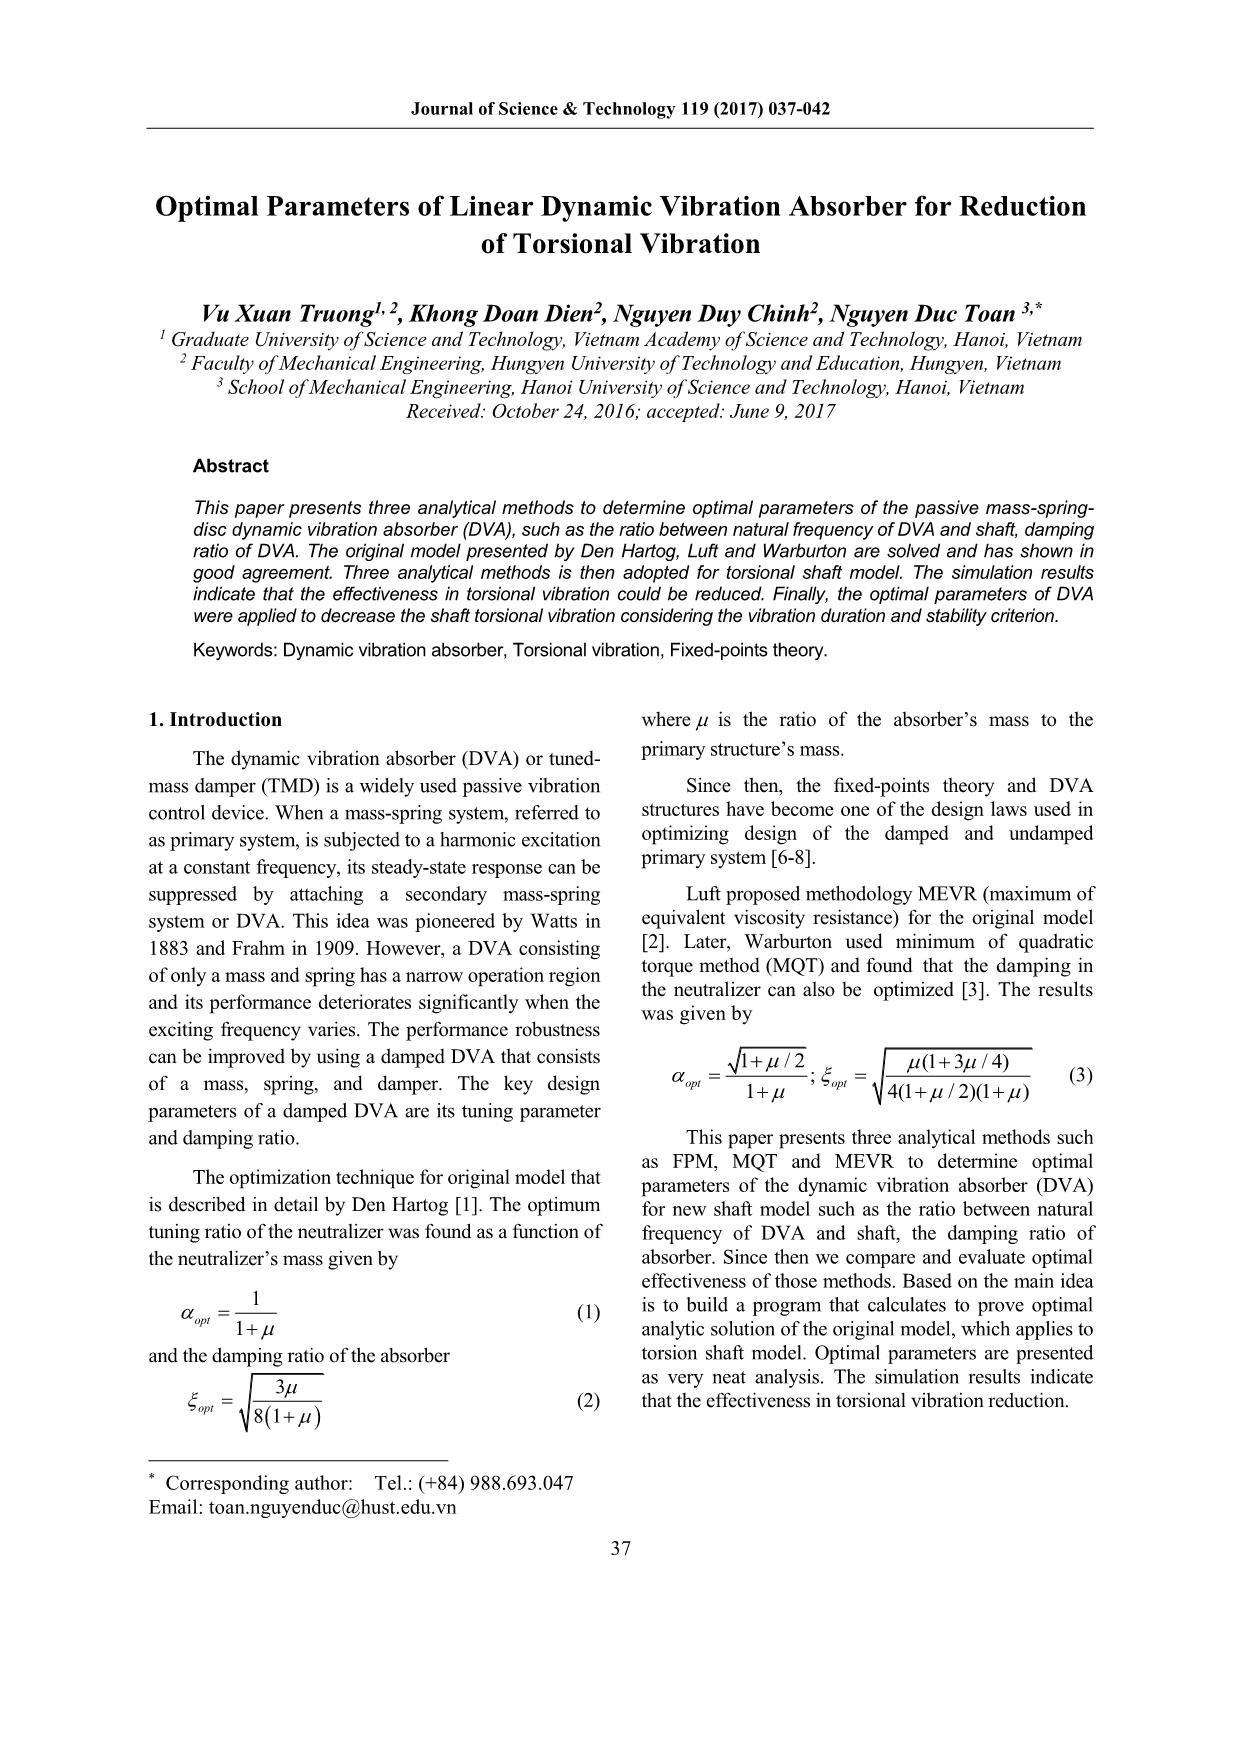 Optimal parameters of linear dynamic vibration absorber for reduction of torsional vibration trang 1